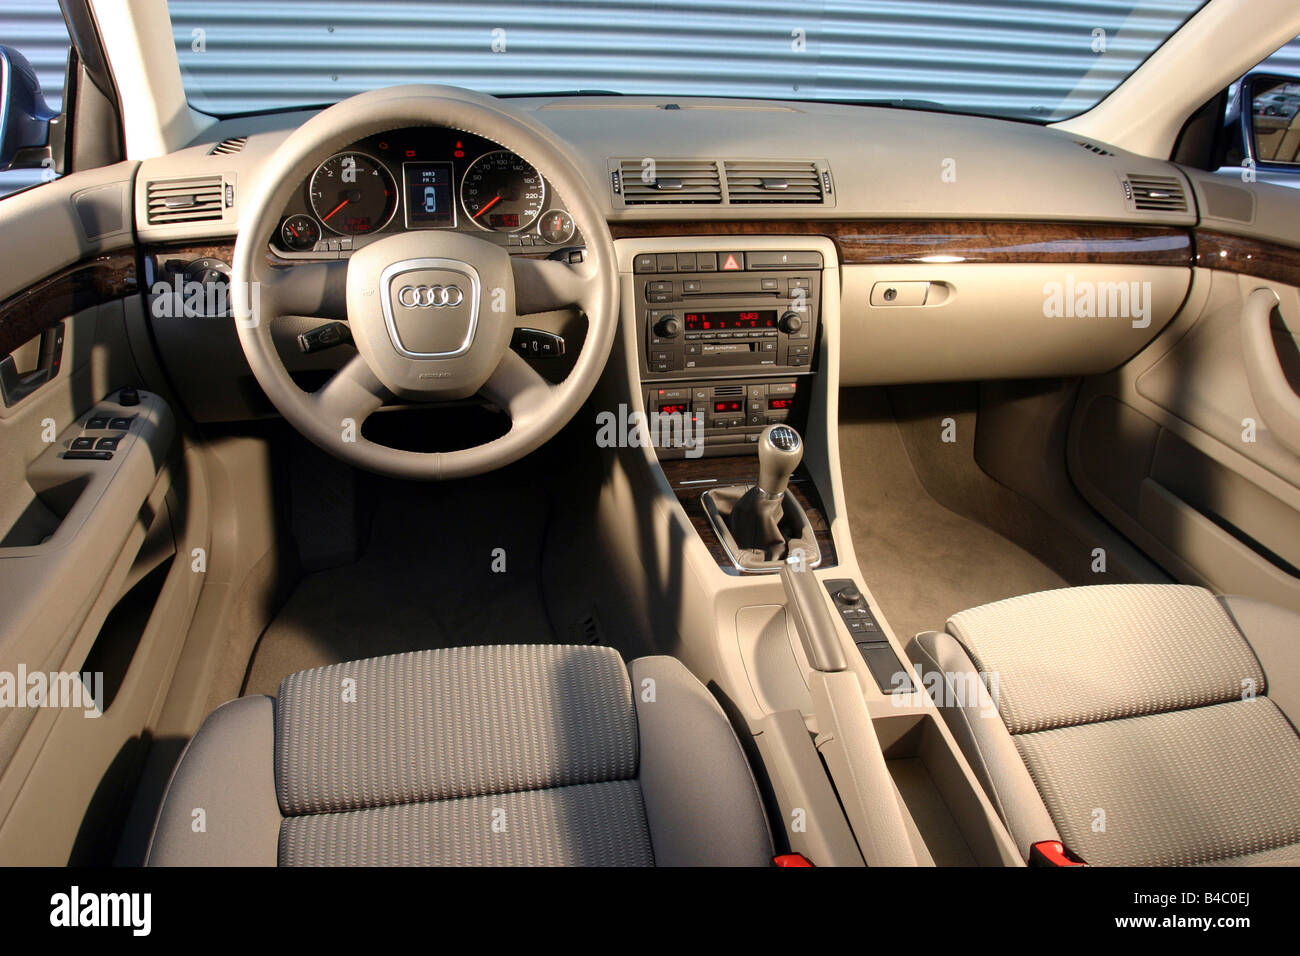 Car, Audi A4 Avant 2.0 TDI, Limousine, hatchback, upper middle-sized ,  model year 2004-, blue, interior view, Interior view, Coc Stock Photo -  Alamy